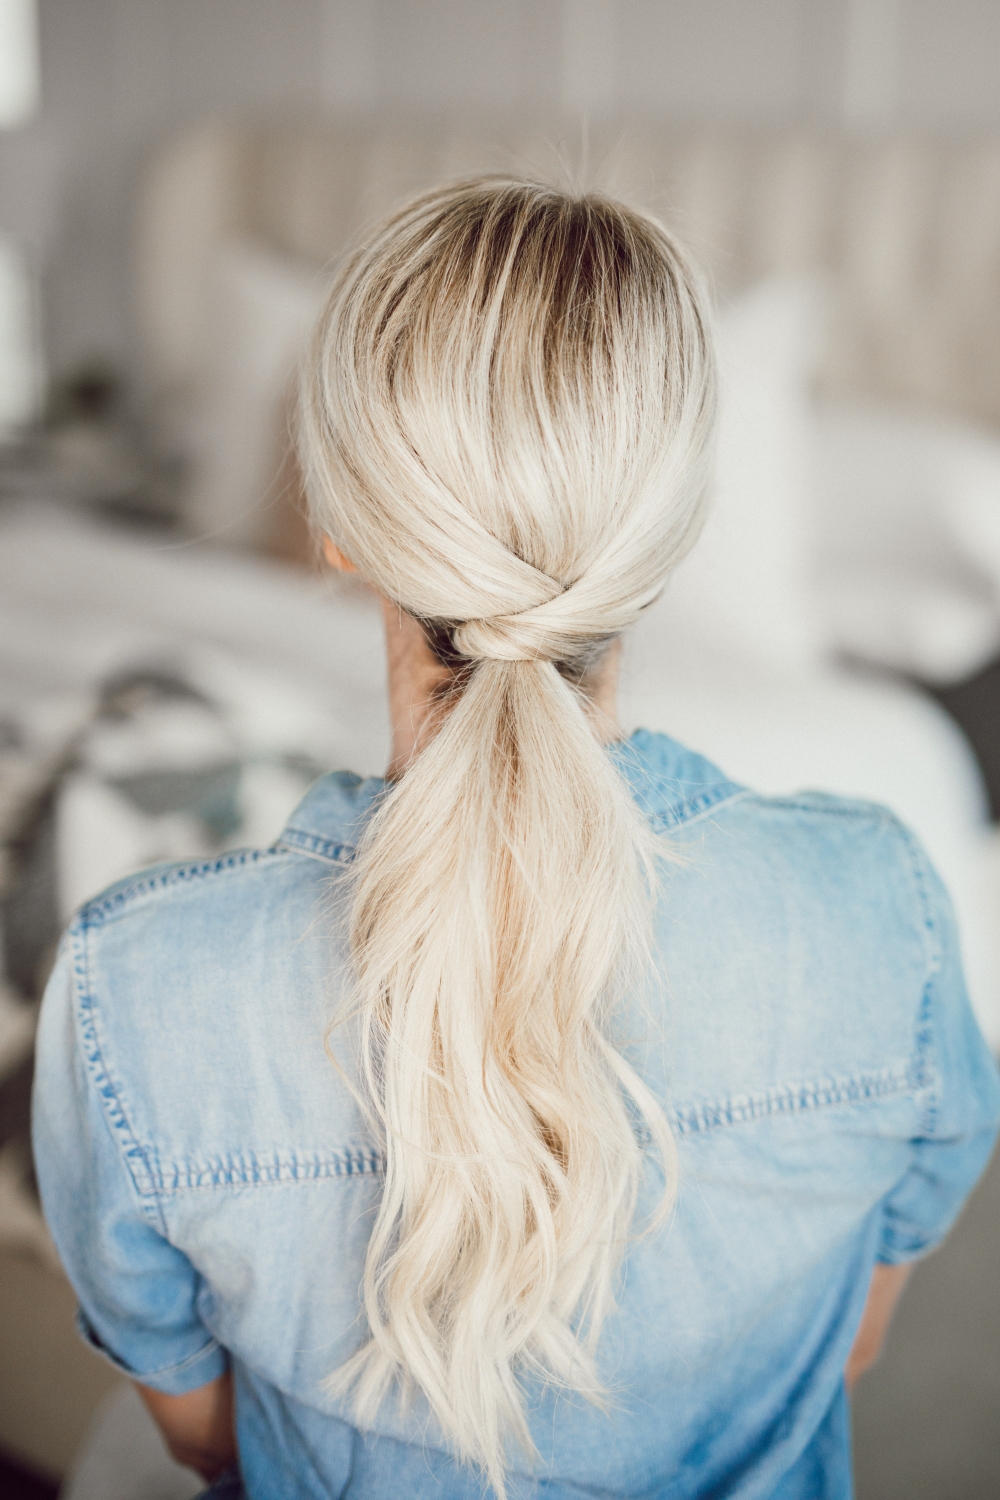 PONYTAIL hairstyles for Spring and Summer!!